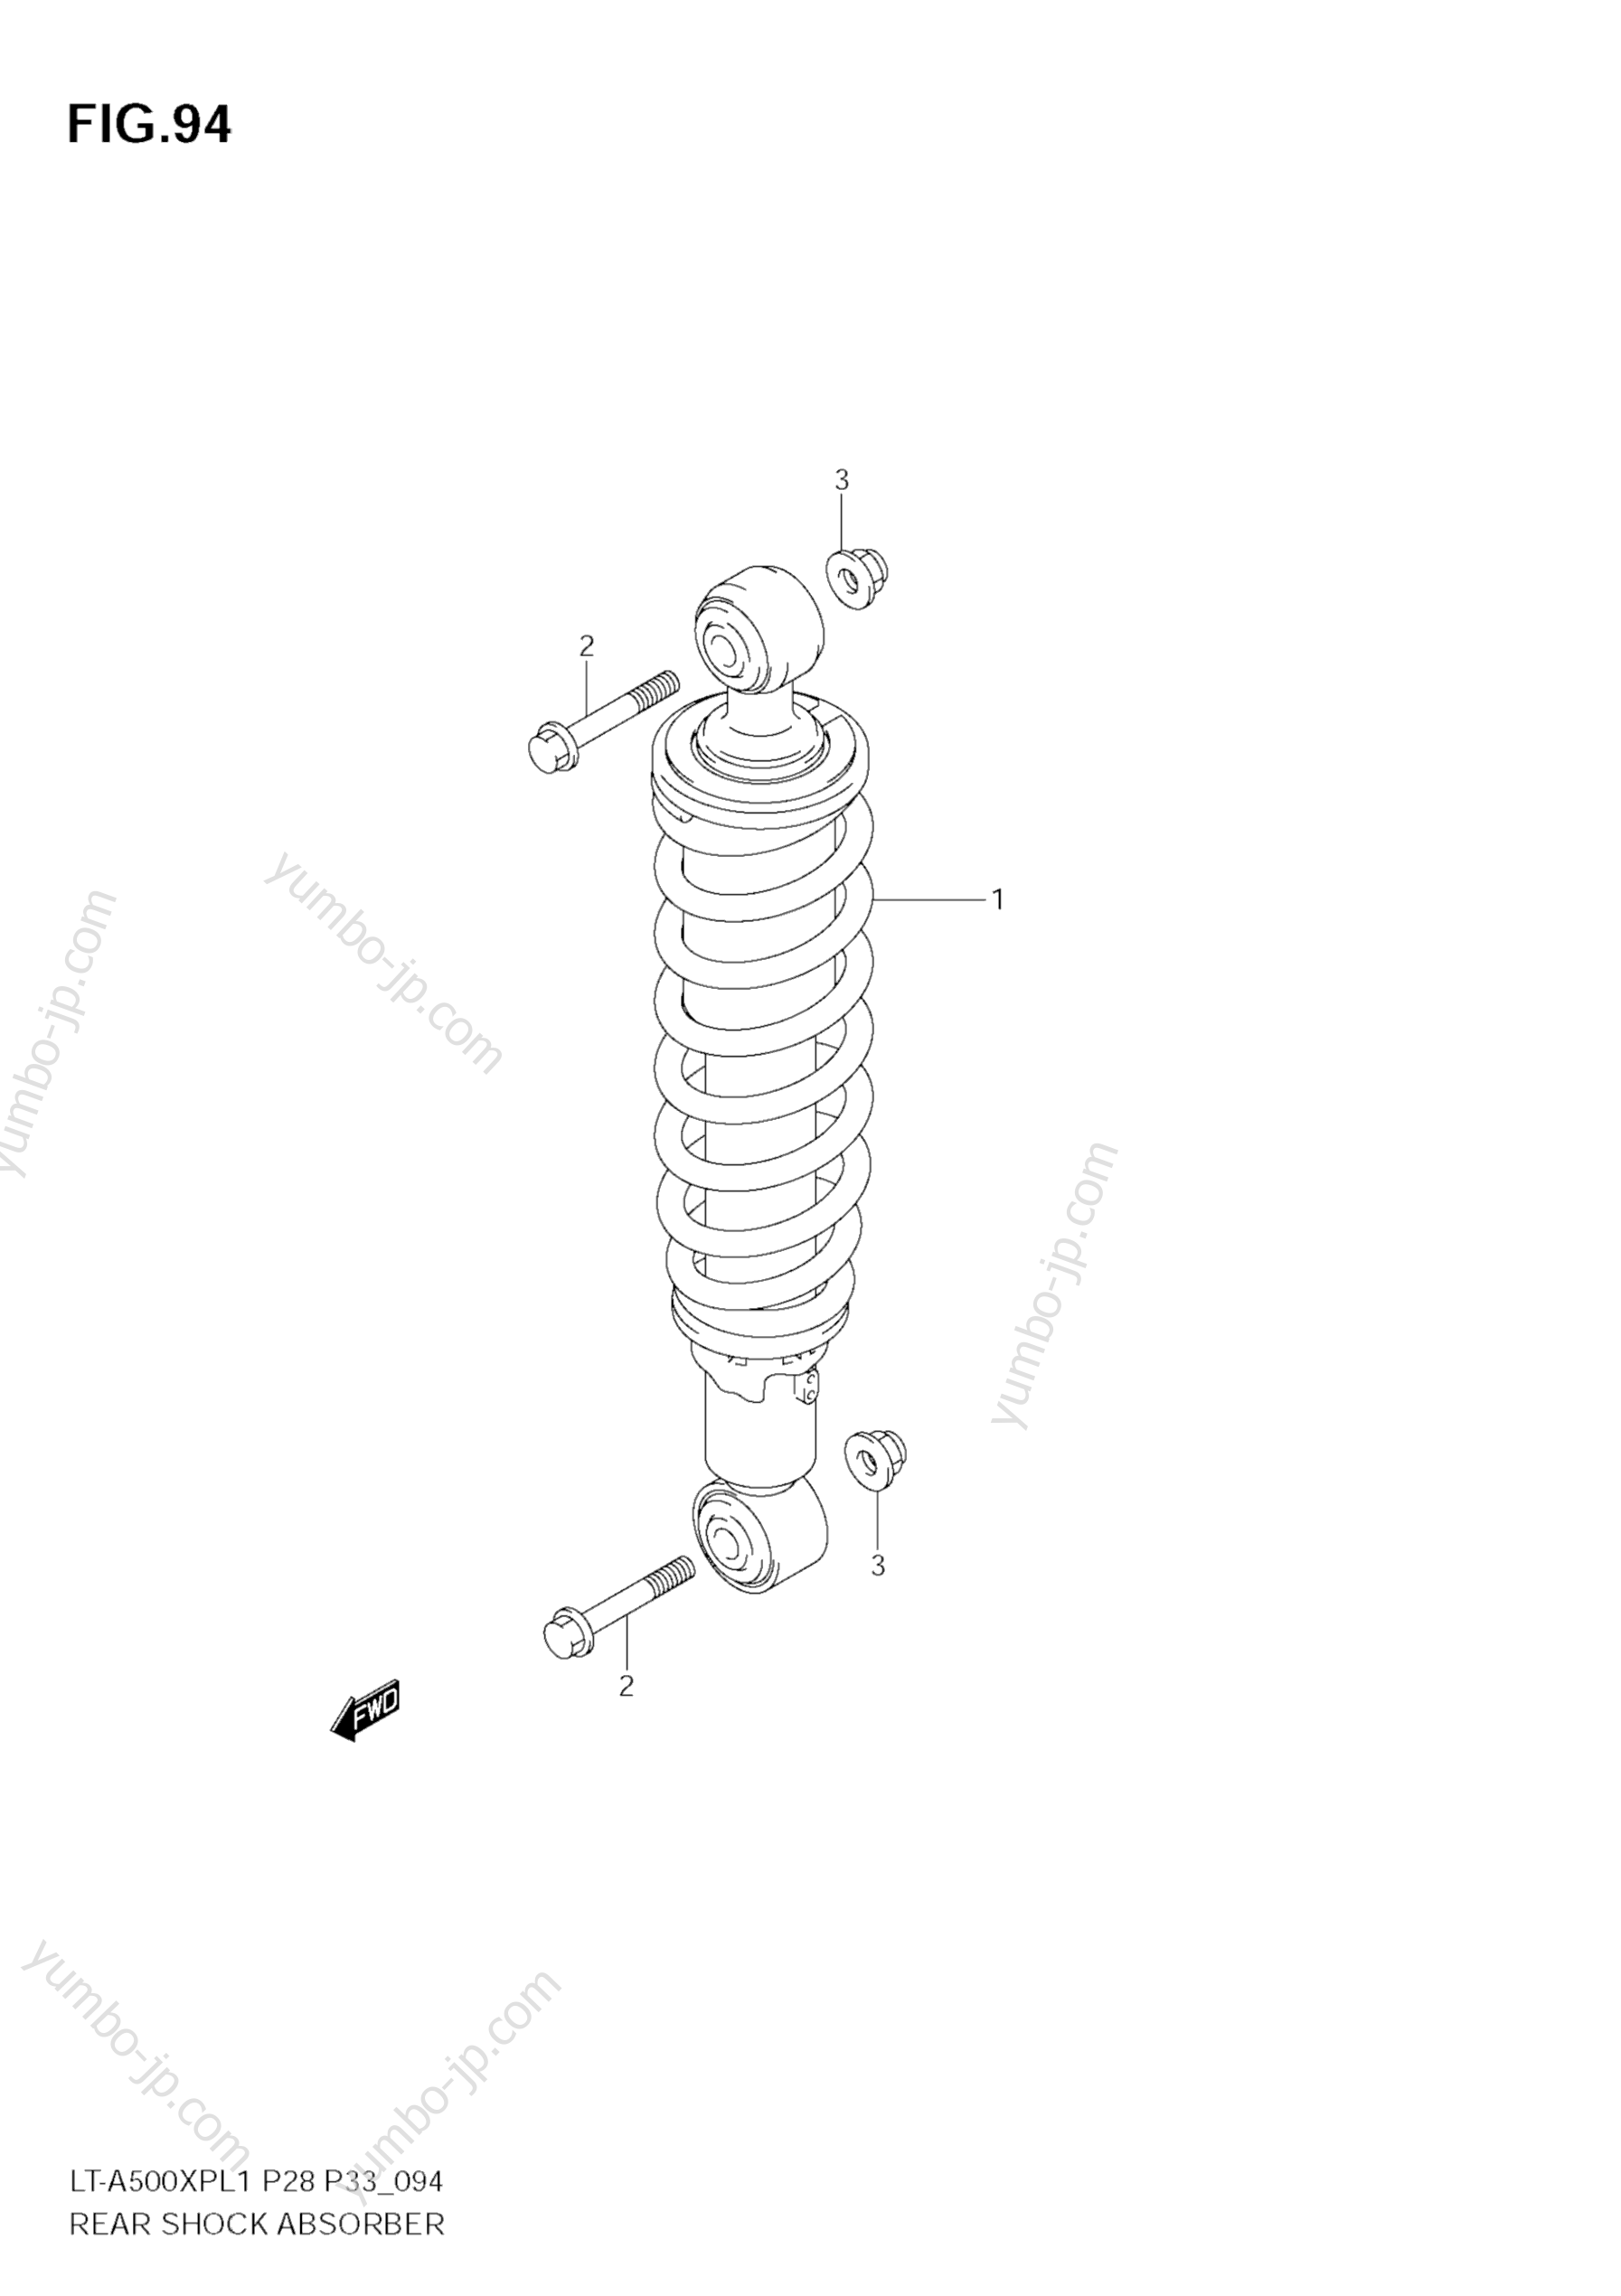 REAR SHOCK ABSORBER for ATVs SUZUKI KingQuad (LT-A500XP) 2011 year